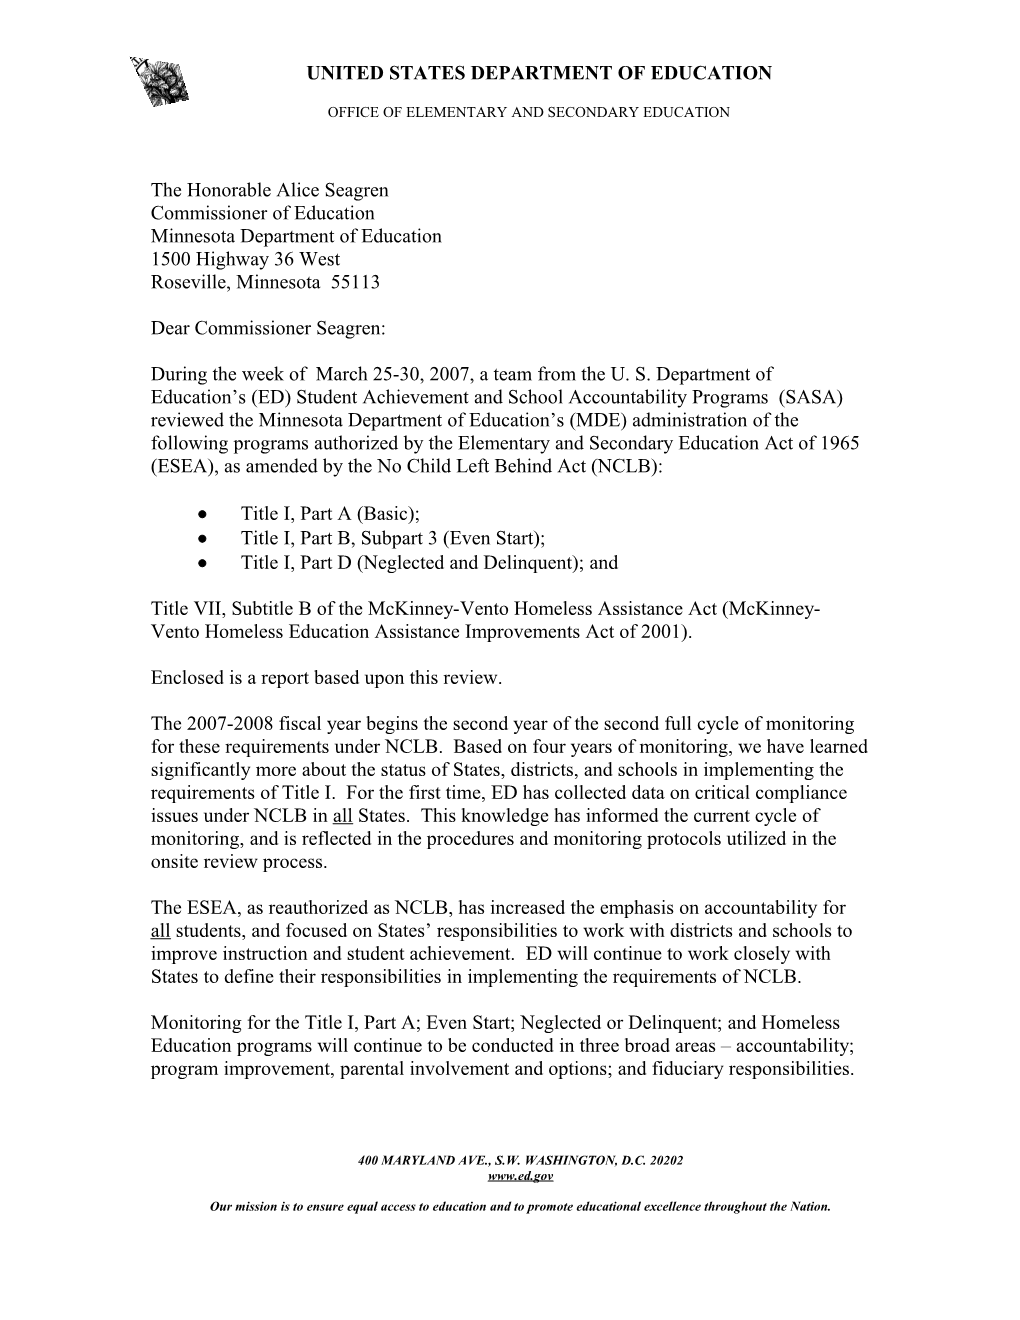 Monitoring Letter to Minnesota Regarding March 25-30, 2007 Monitoring Review (MS WORD)